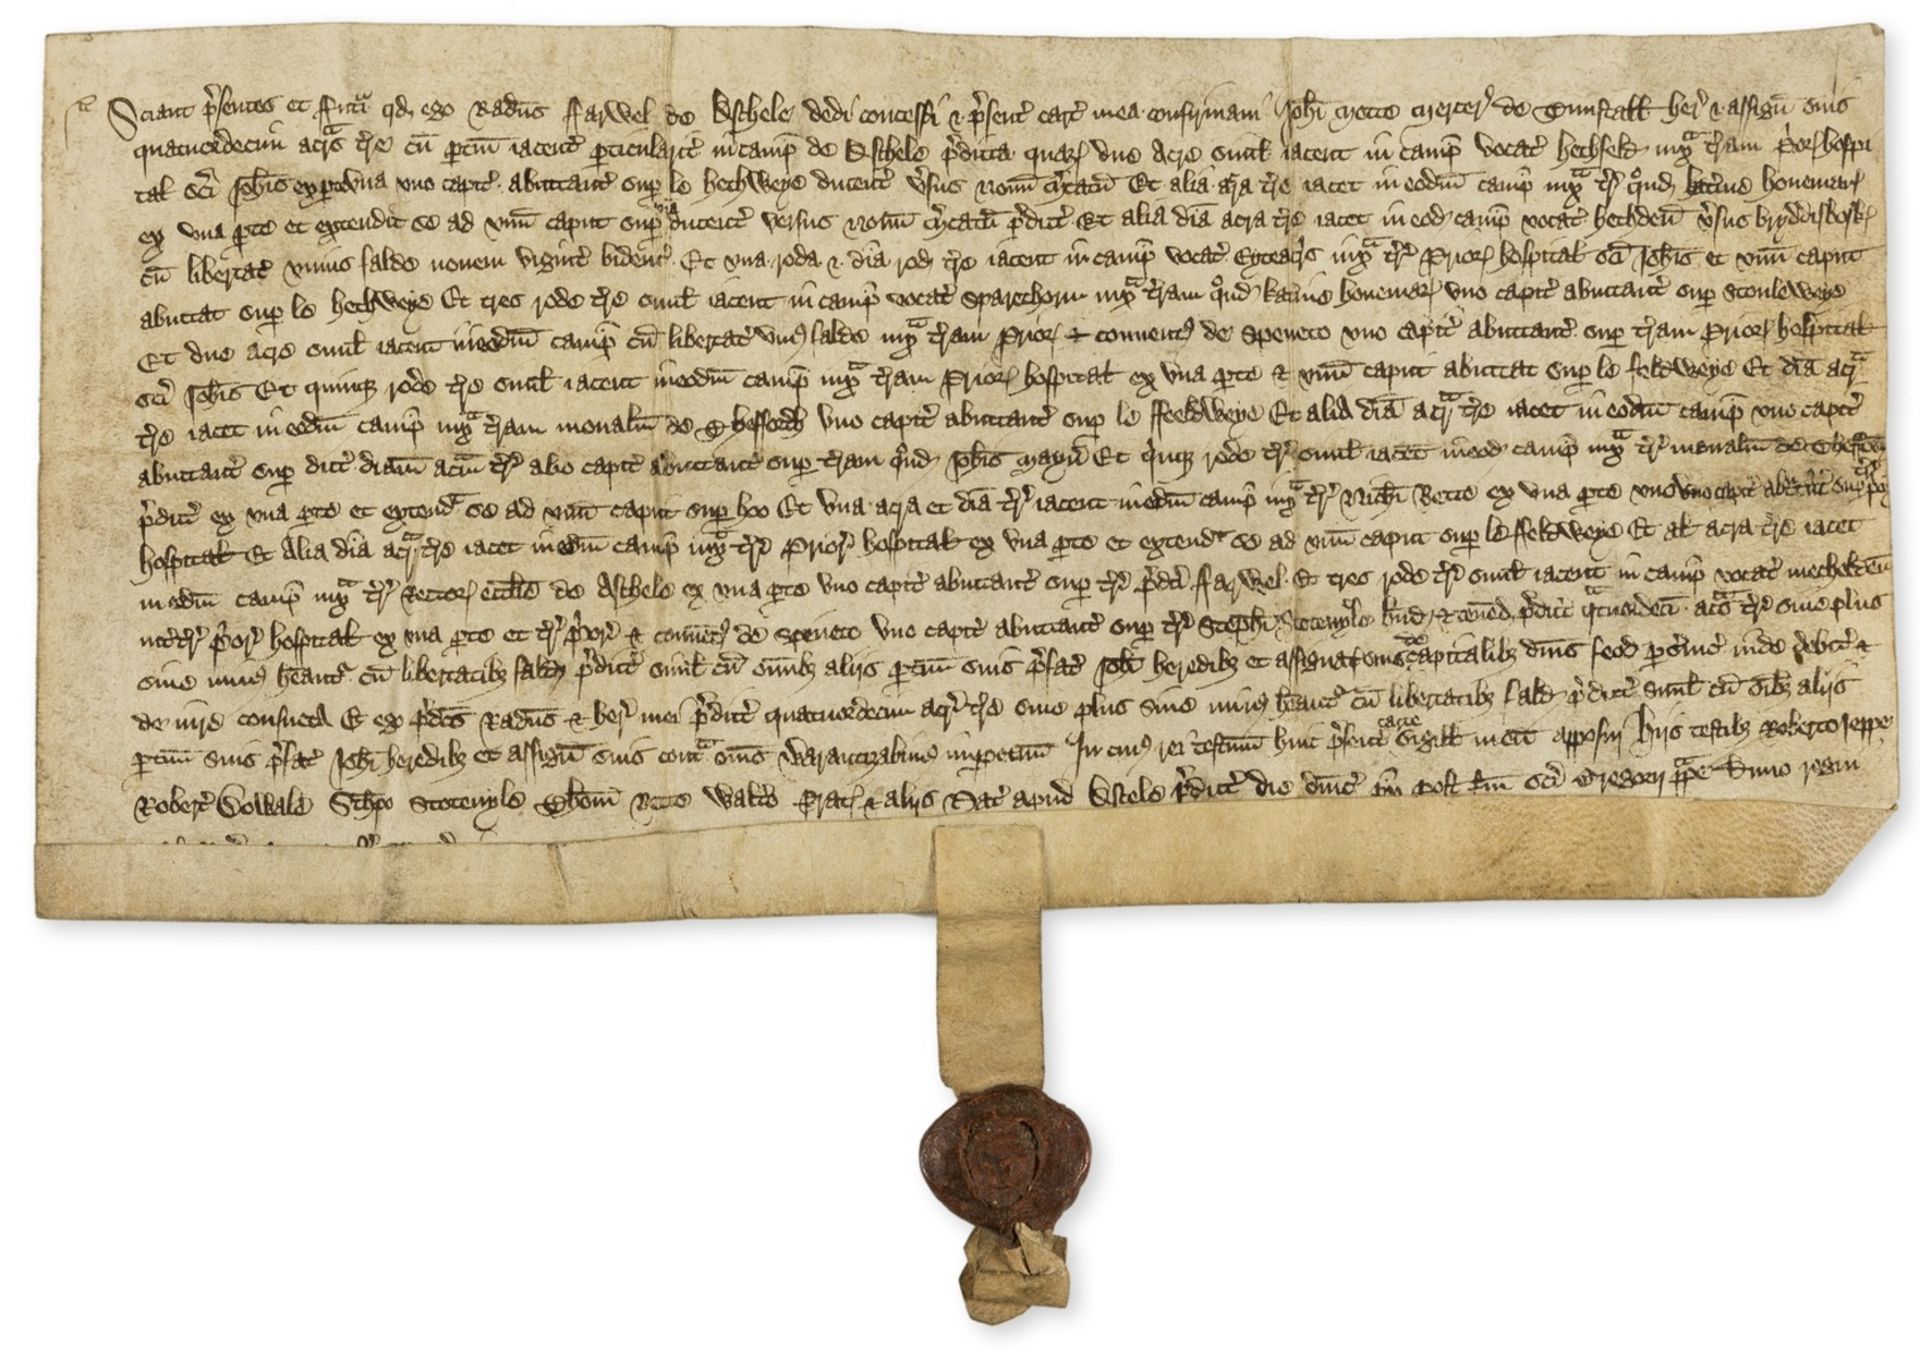 Cambridgeshire, Ashley.- Charter by Ralph Farwell of Aschele [Ashley] confirmation to John Motte …